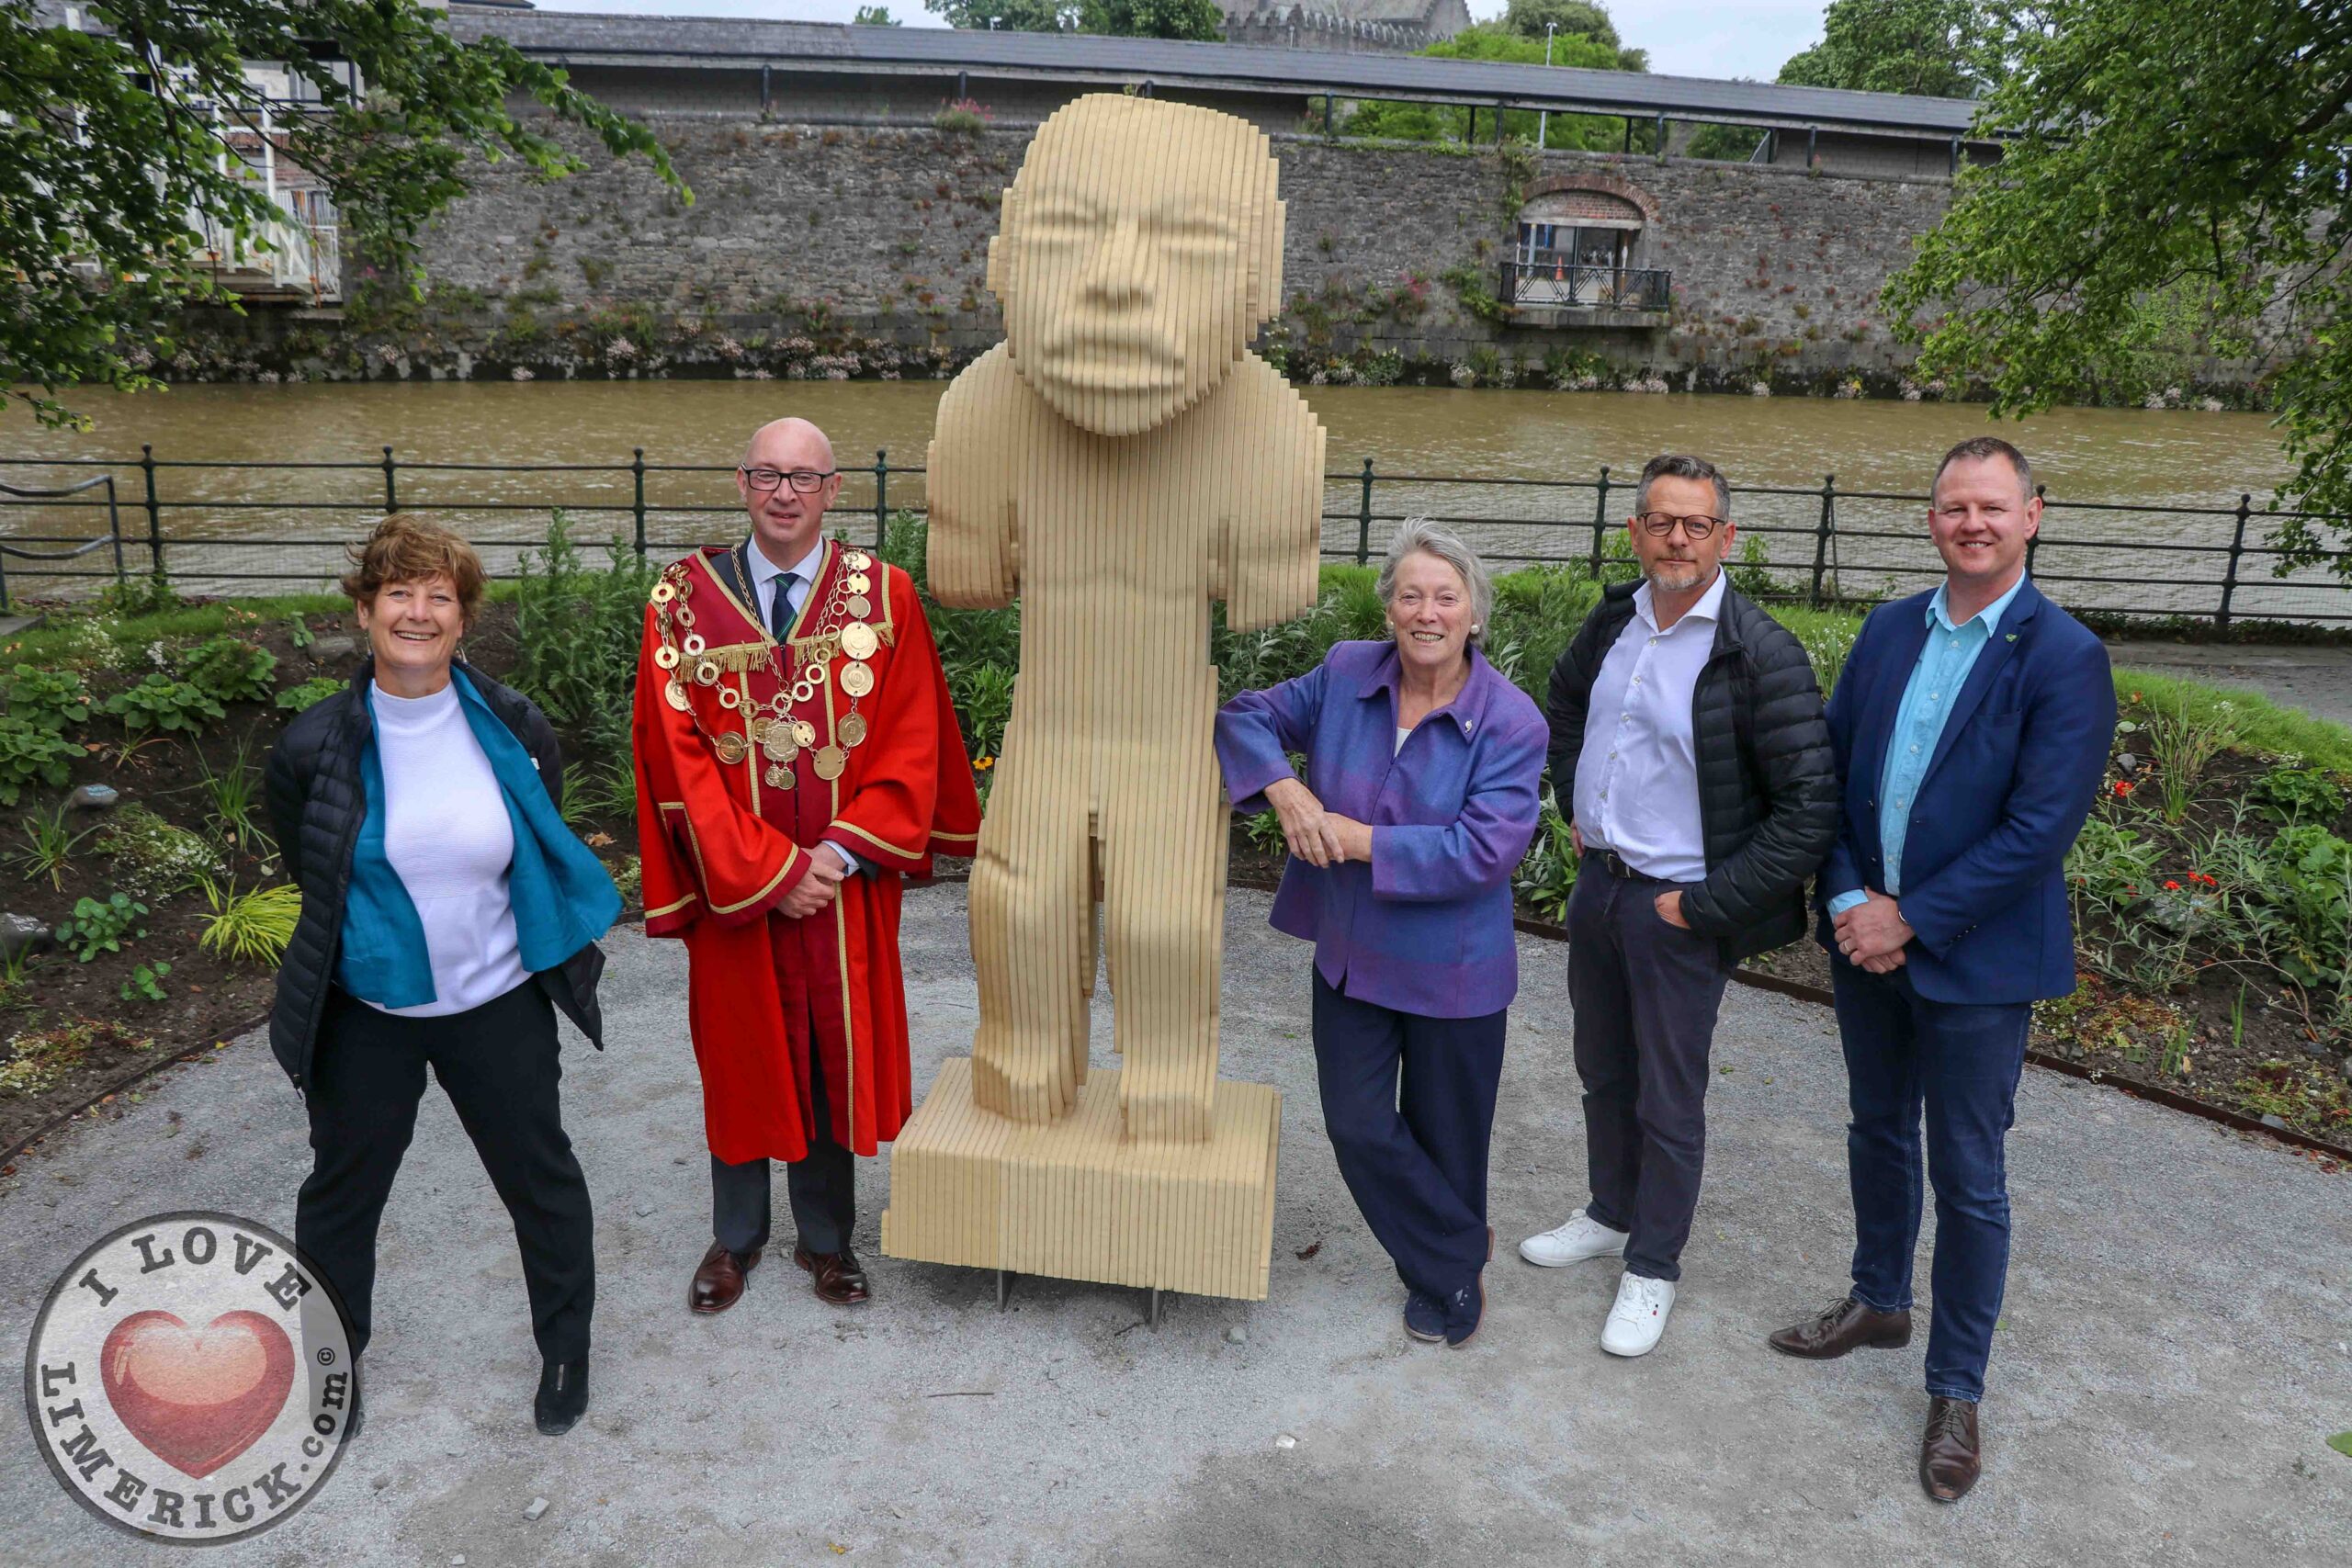 Museum in a Garden - Pictured at the launch are Jill Cousins, Director, The Hunt Museum, Mayor of Limerick, Cllr Michael Collins, Eanna Ní Lamhna, Biologist and Environmental Consultant, John Moran, Chair of the Museum, Keith Grenville, ARUP Engineers. Picture: Farhan Saeed/ilovelimerick